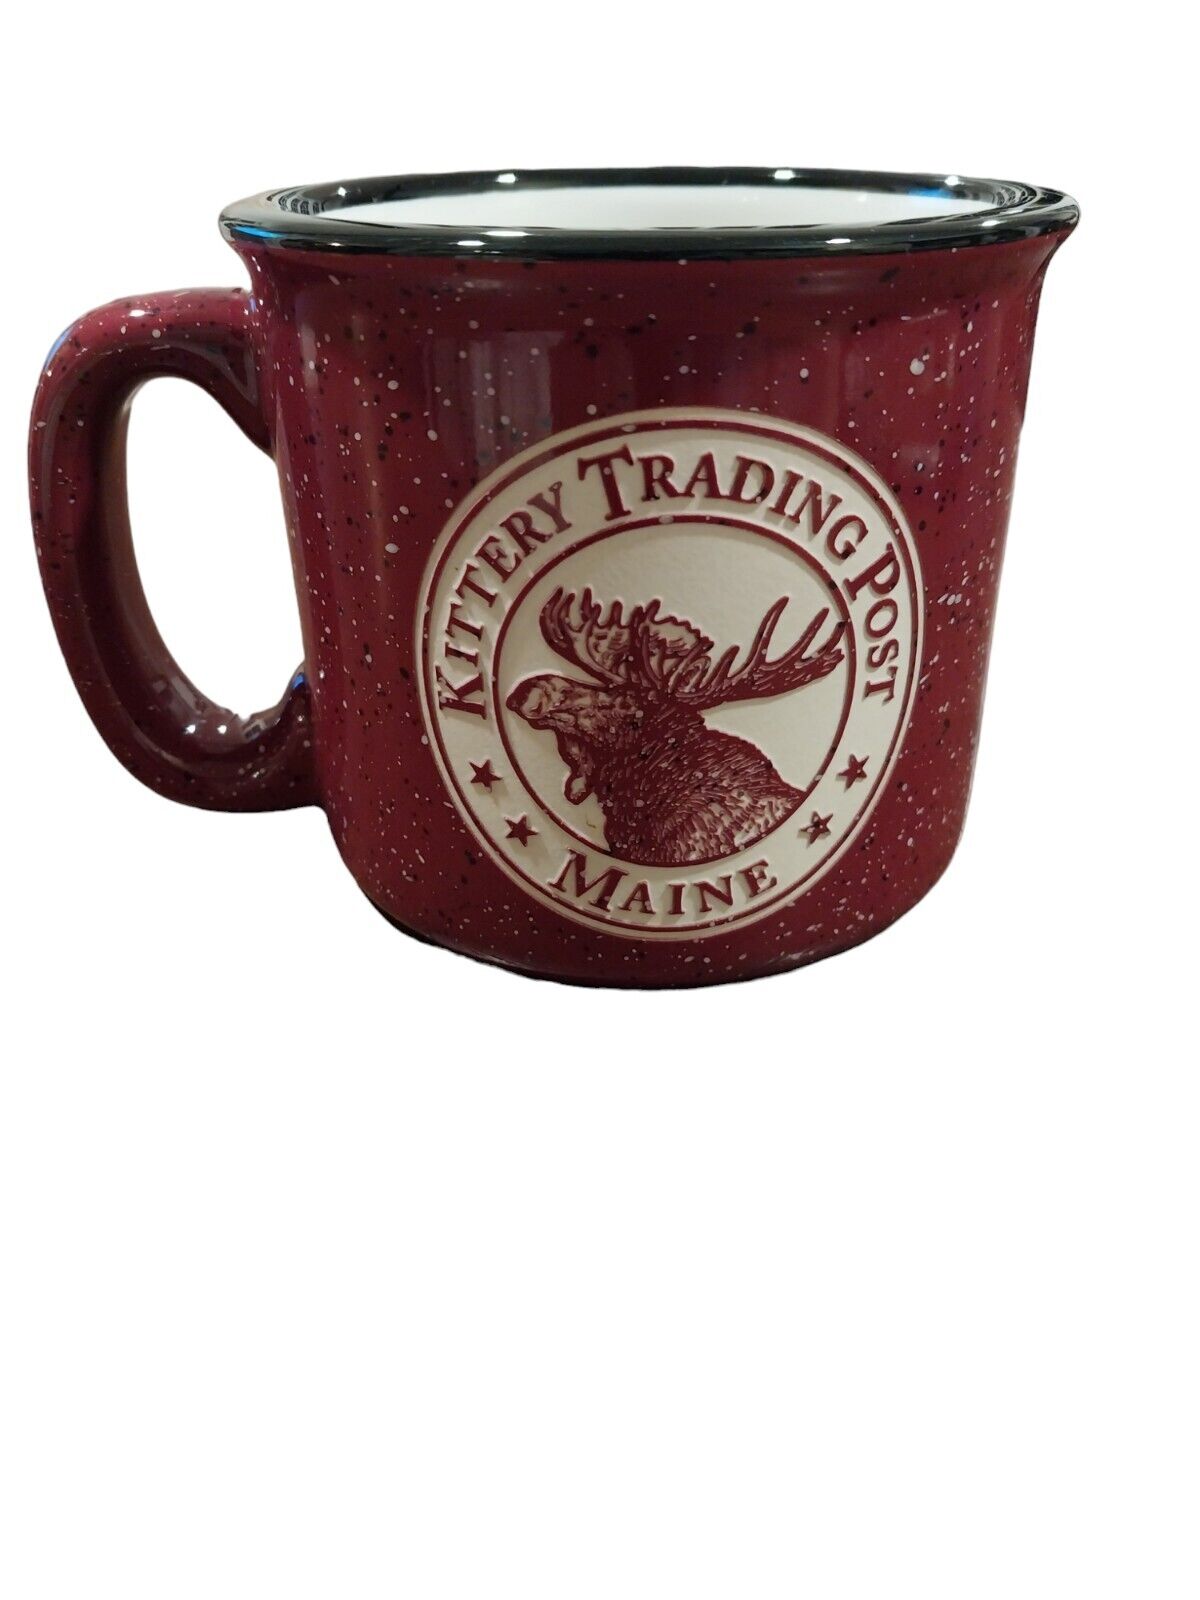 Kittery Trading Post Maine Heavy Coffee Mug Cup Red Speckled Raised Moose 